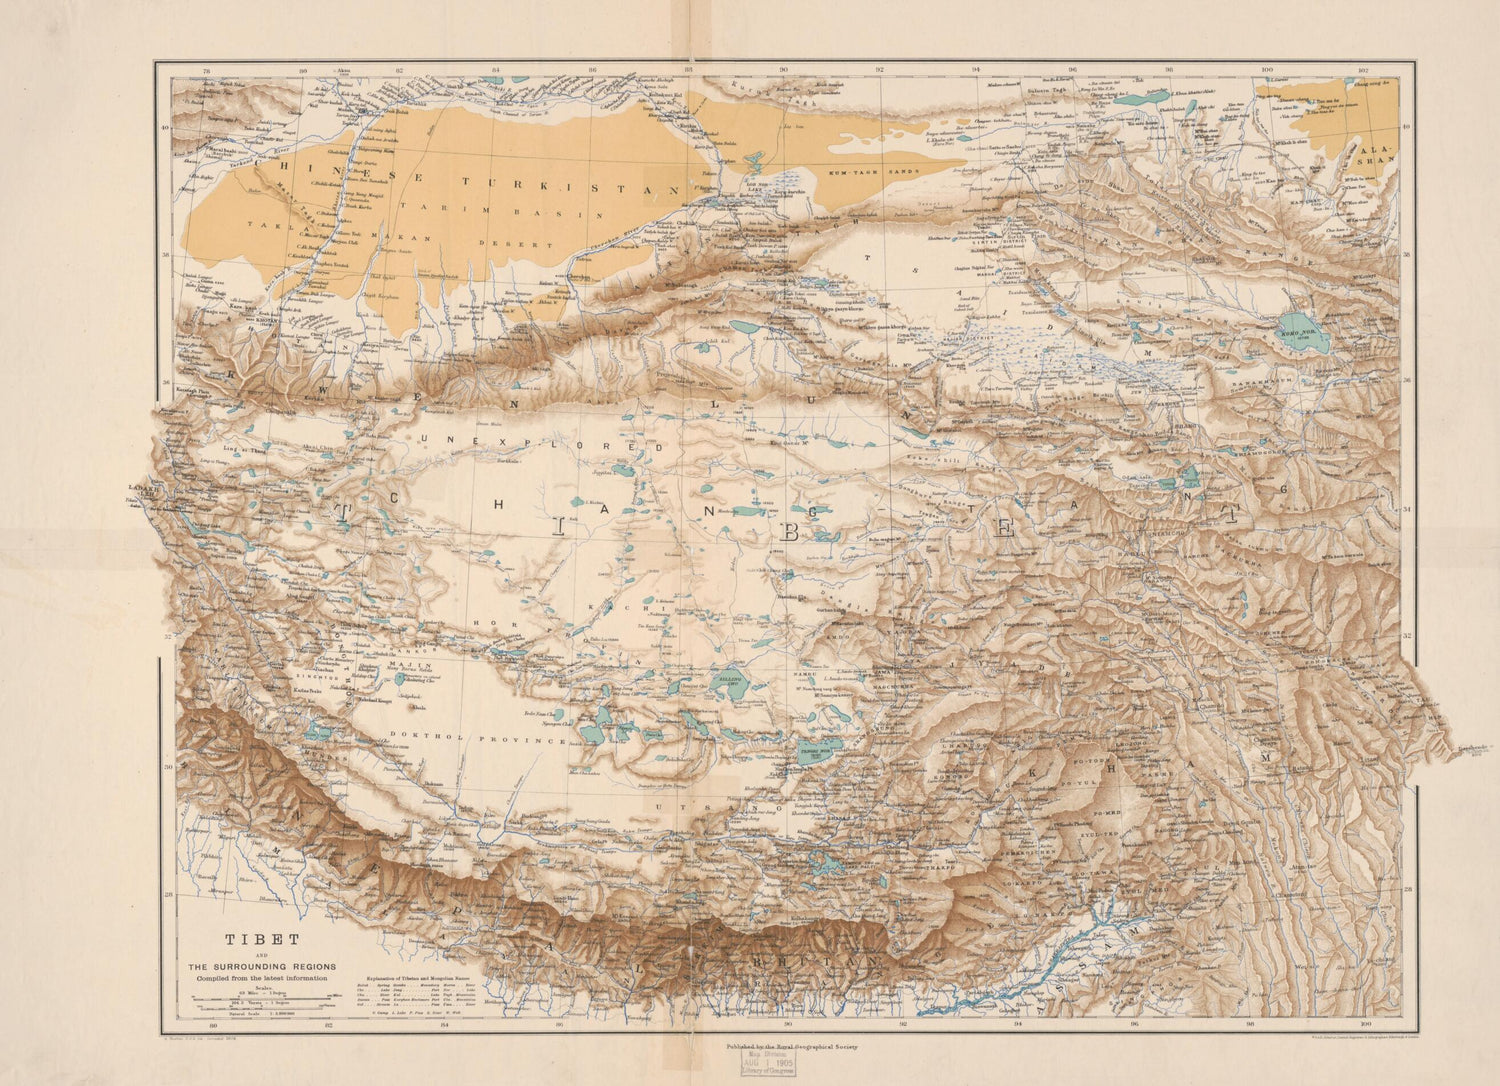 This old map of Tibet and the Surrounding Regions : Compiled from the Latest Information from 1904 was created by  Royal Geographical Society (Great Britain), H. (Henry) Sharbau in 1904